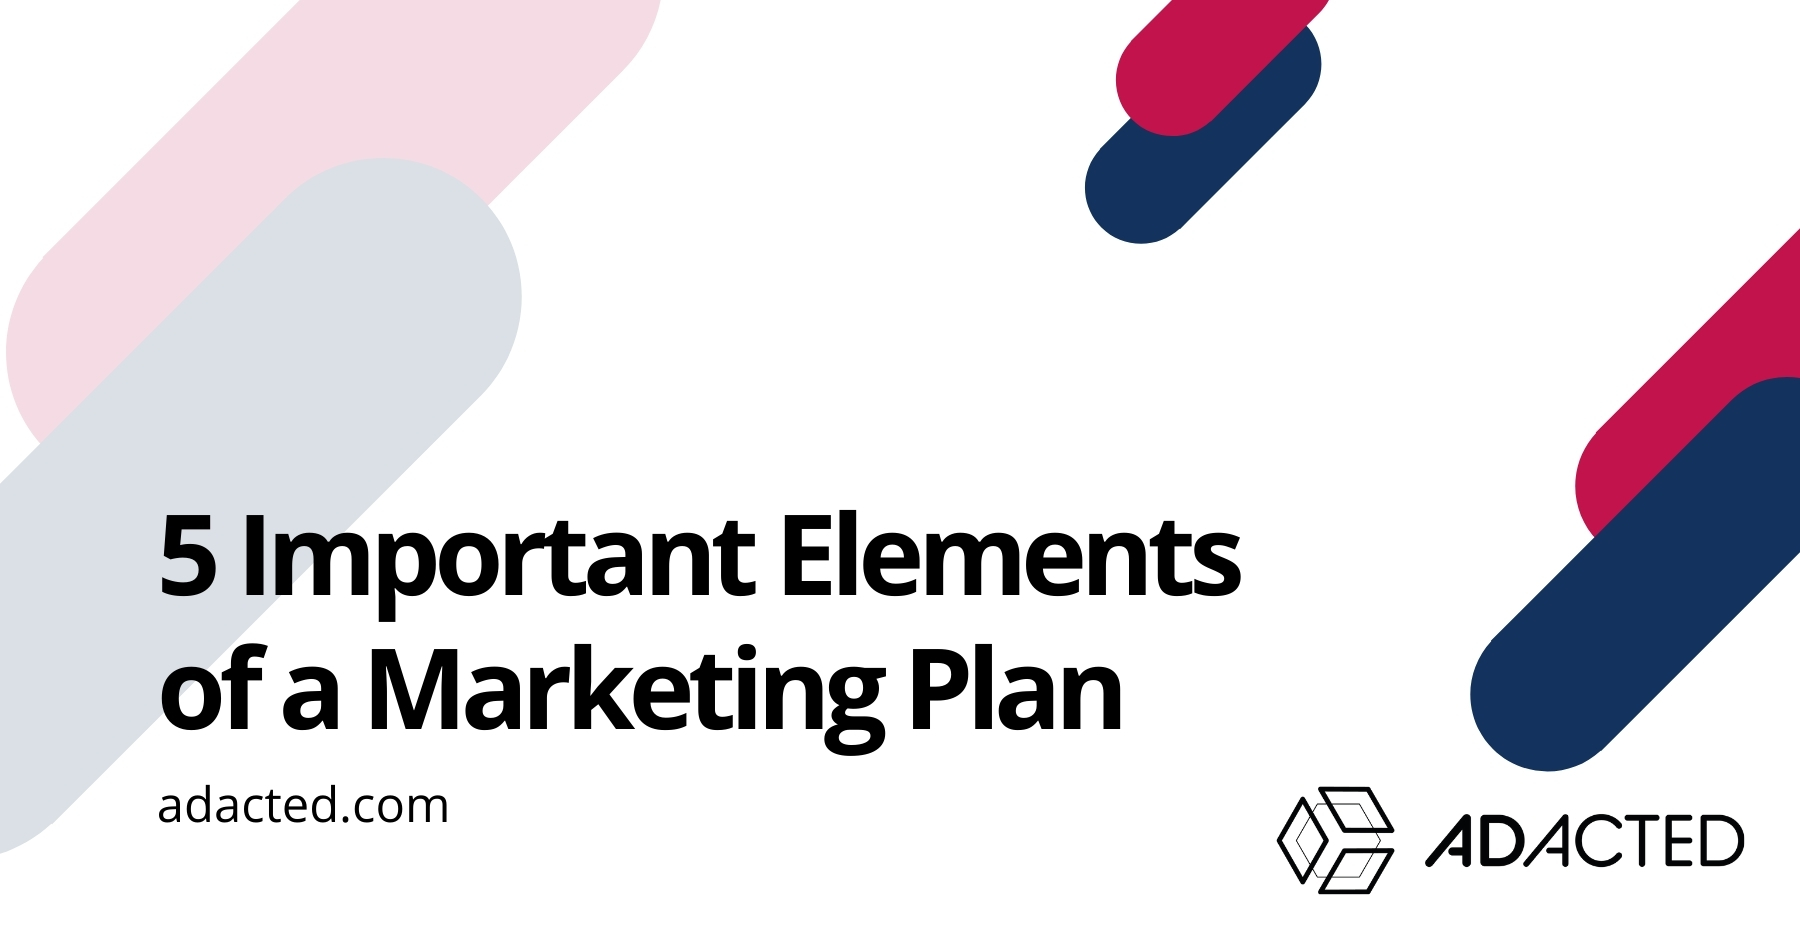 5 Important Elements of a Marketing Plan - Adacted